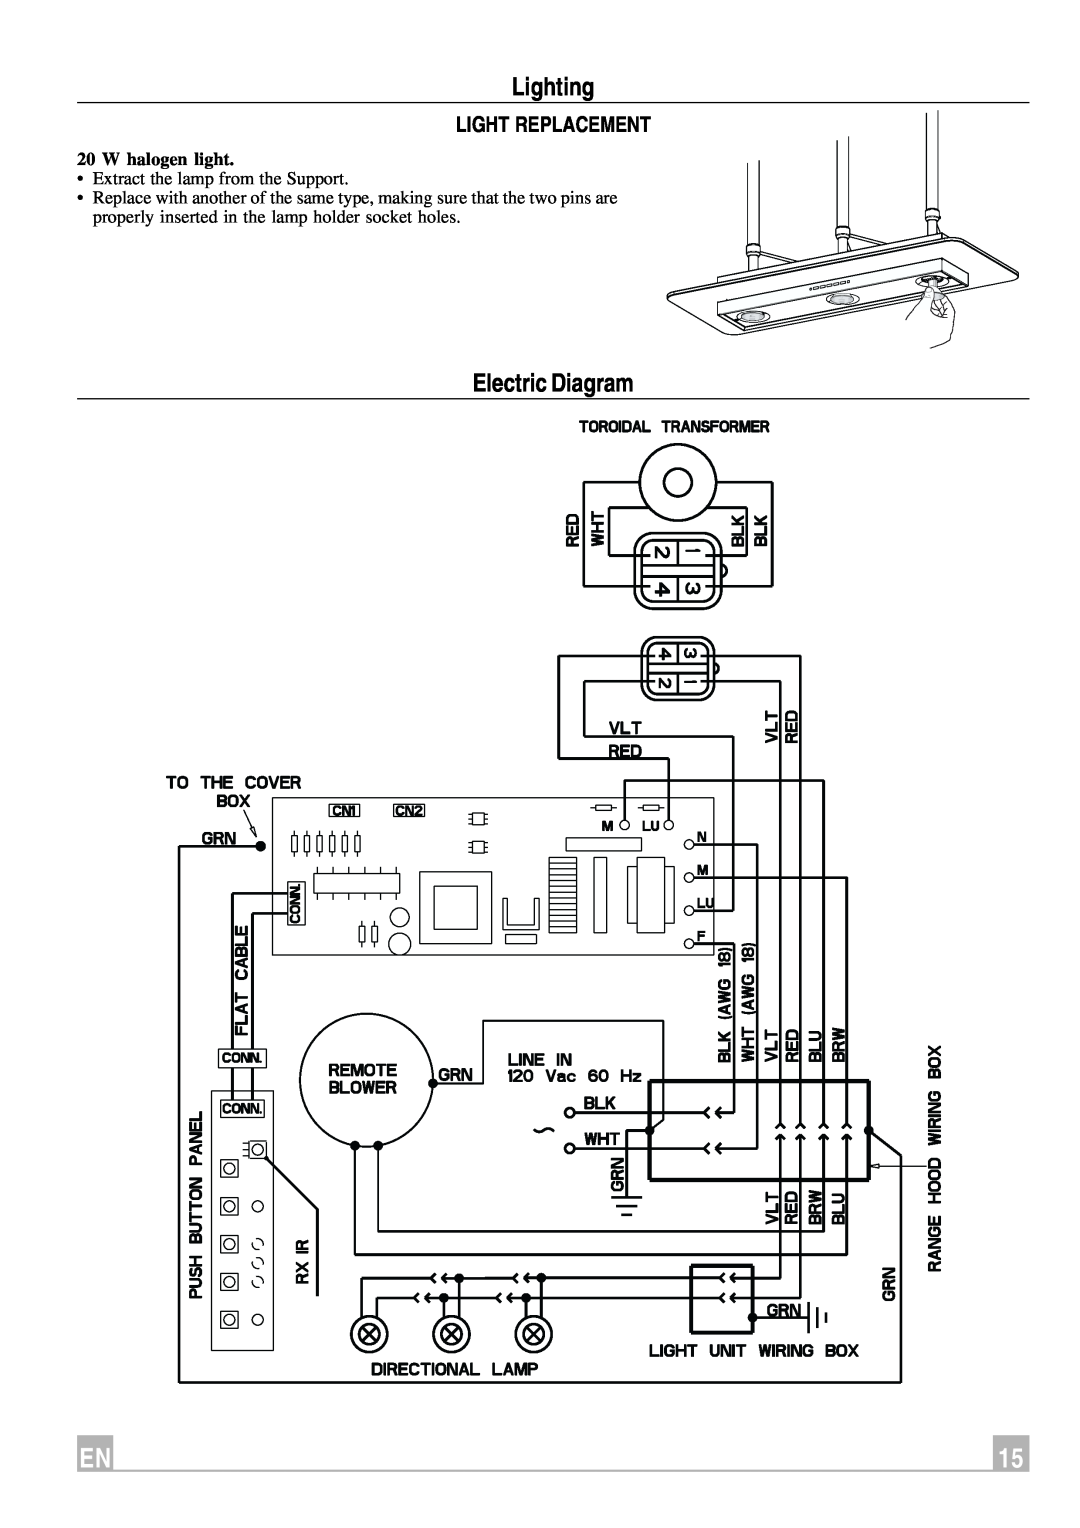 Faber Remote Blower instruction manual Lighting, Electric Diagram, Light Replacement, W halogen light 